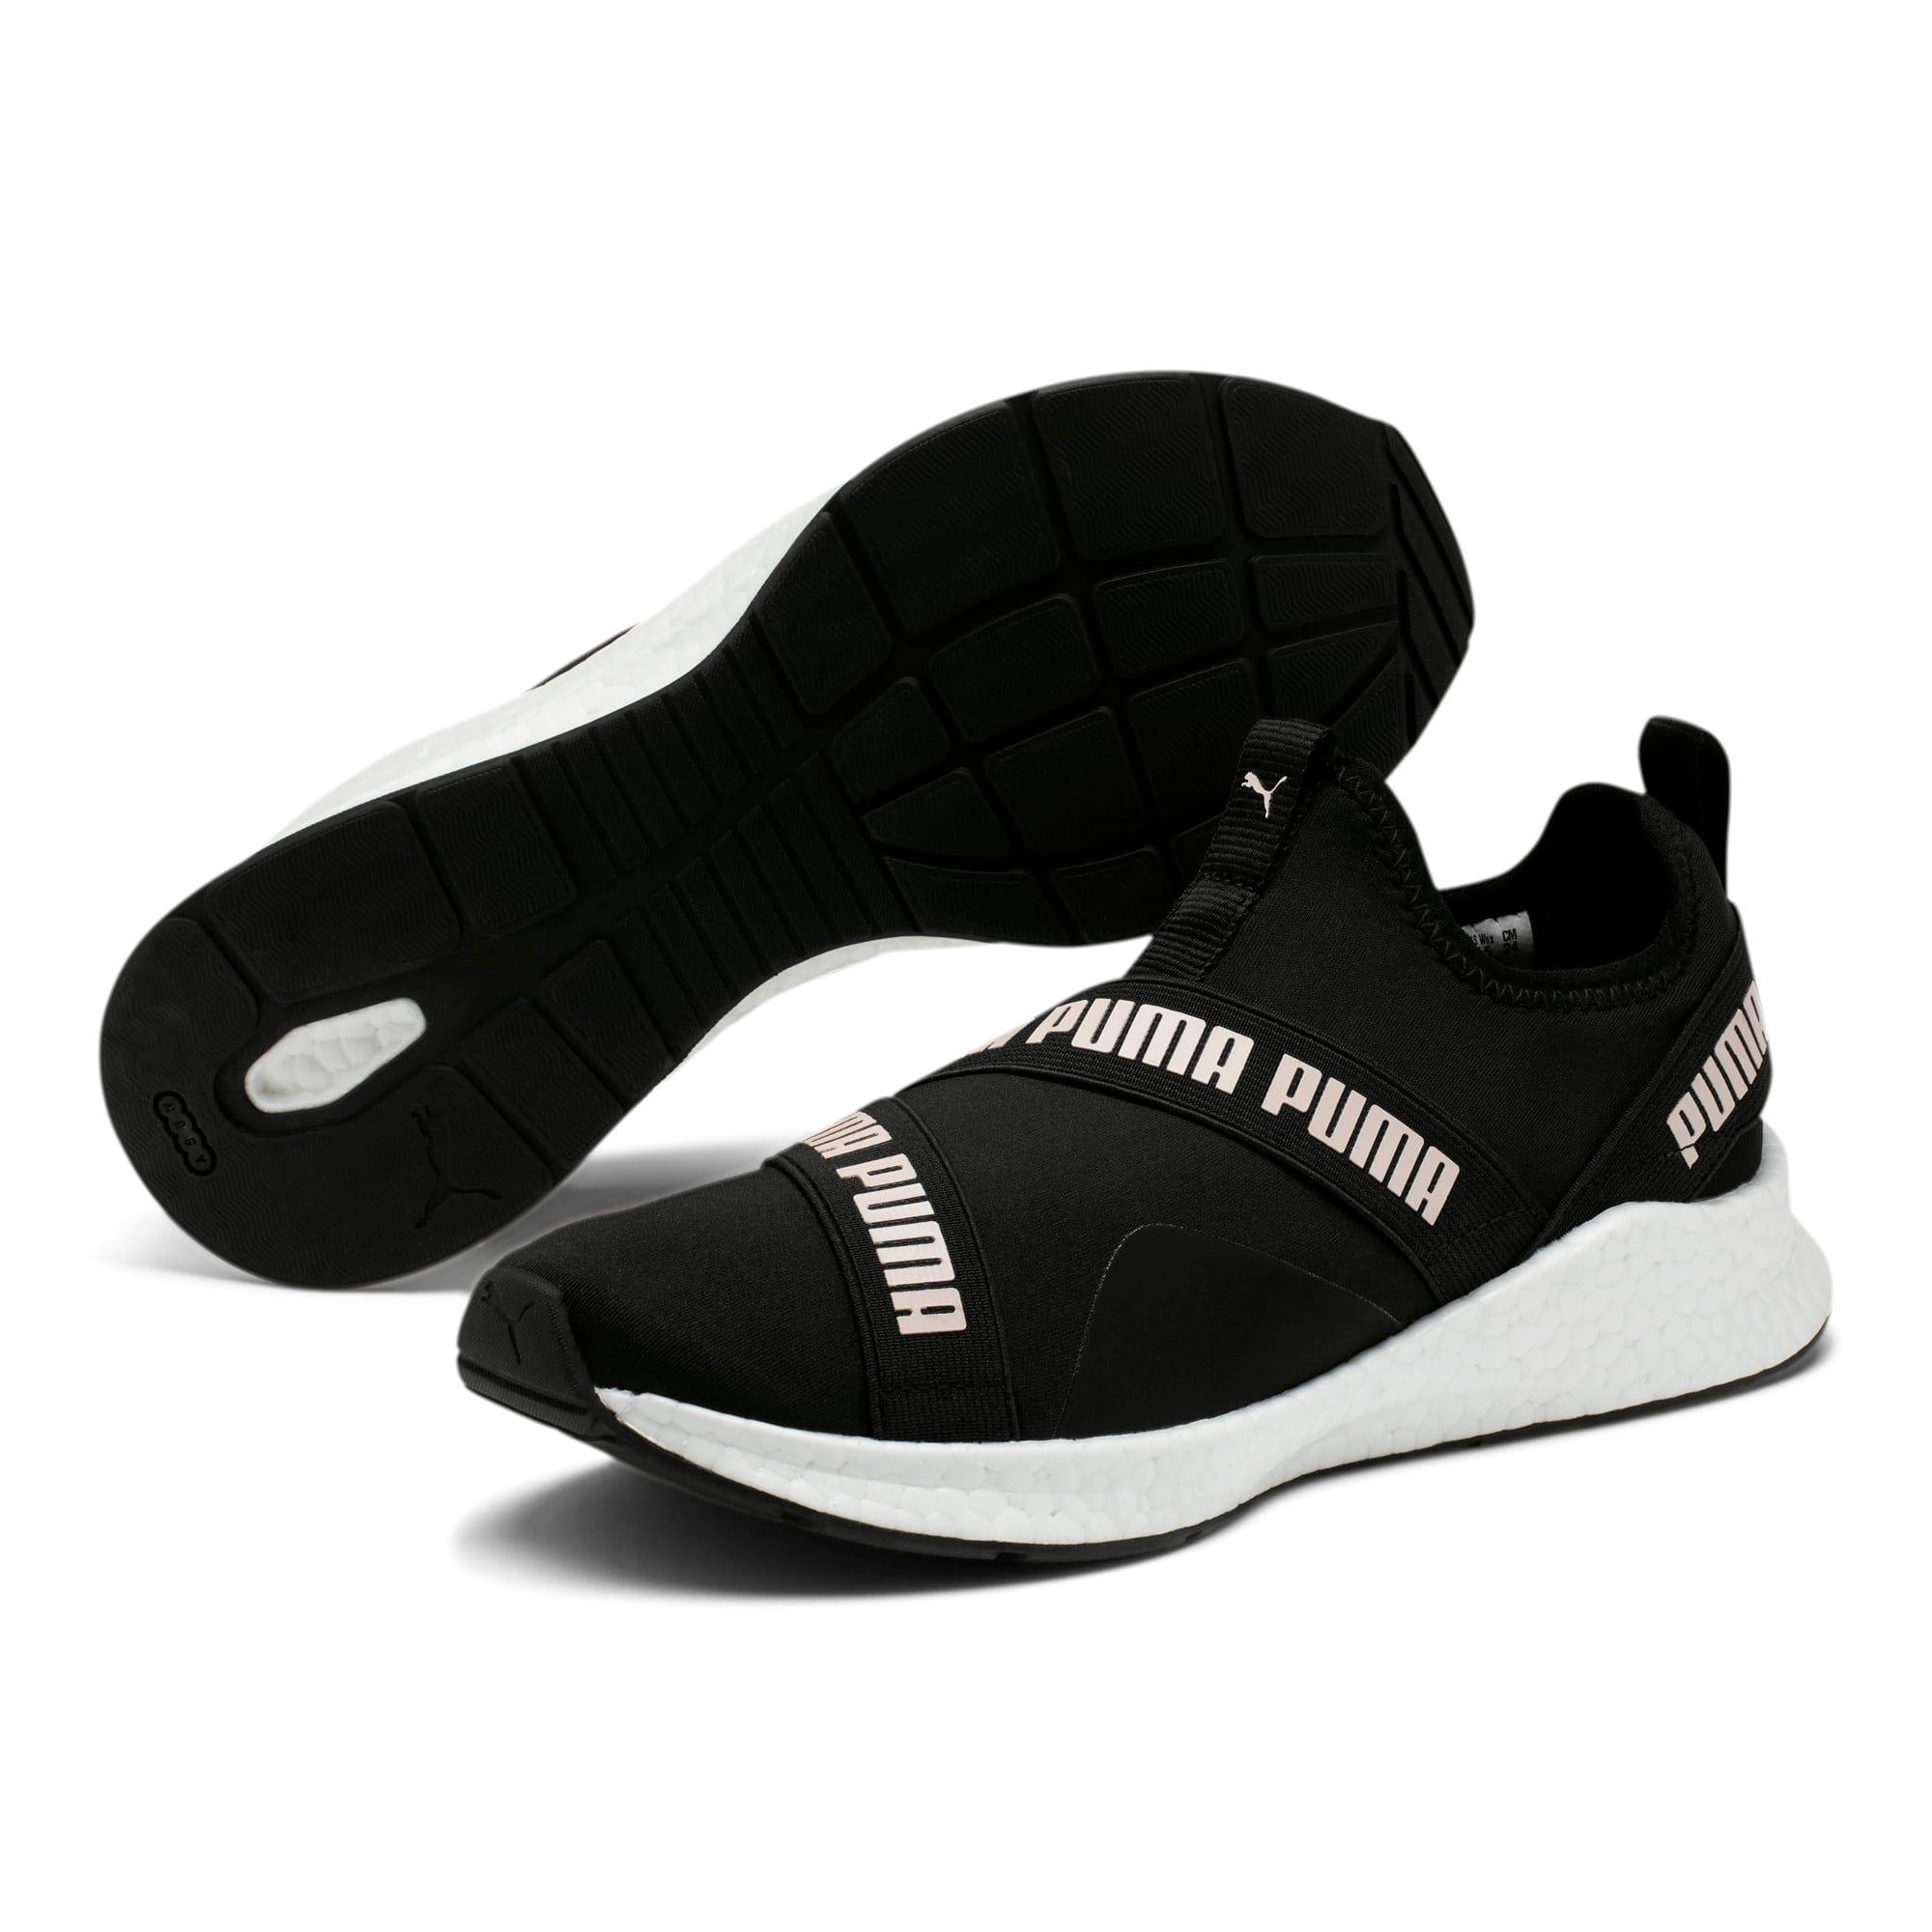 PUMA Synthetic Nrgy Star Slip-on Running Shoes in Black-Pearl-White ...